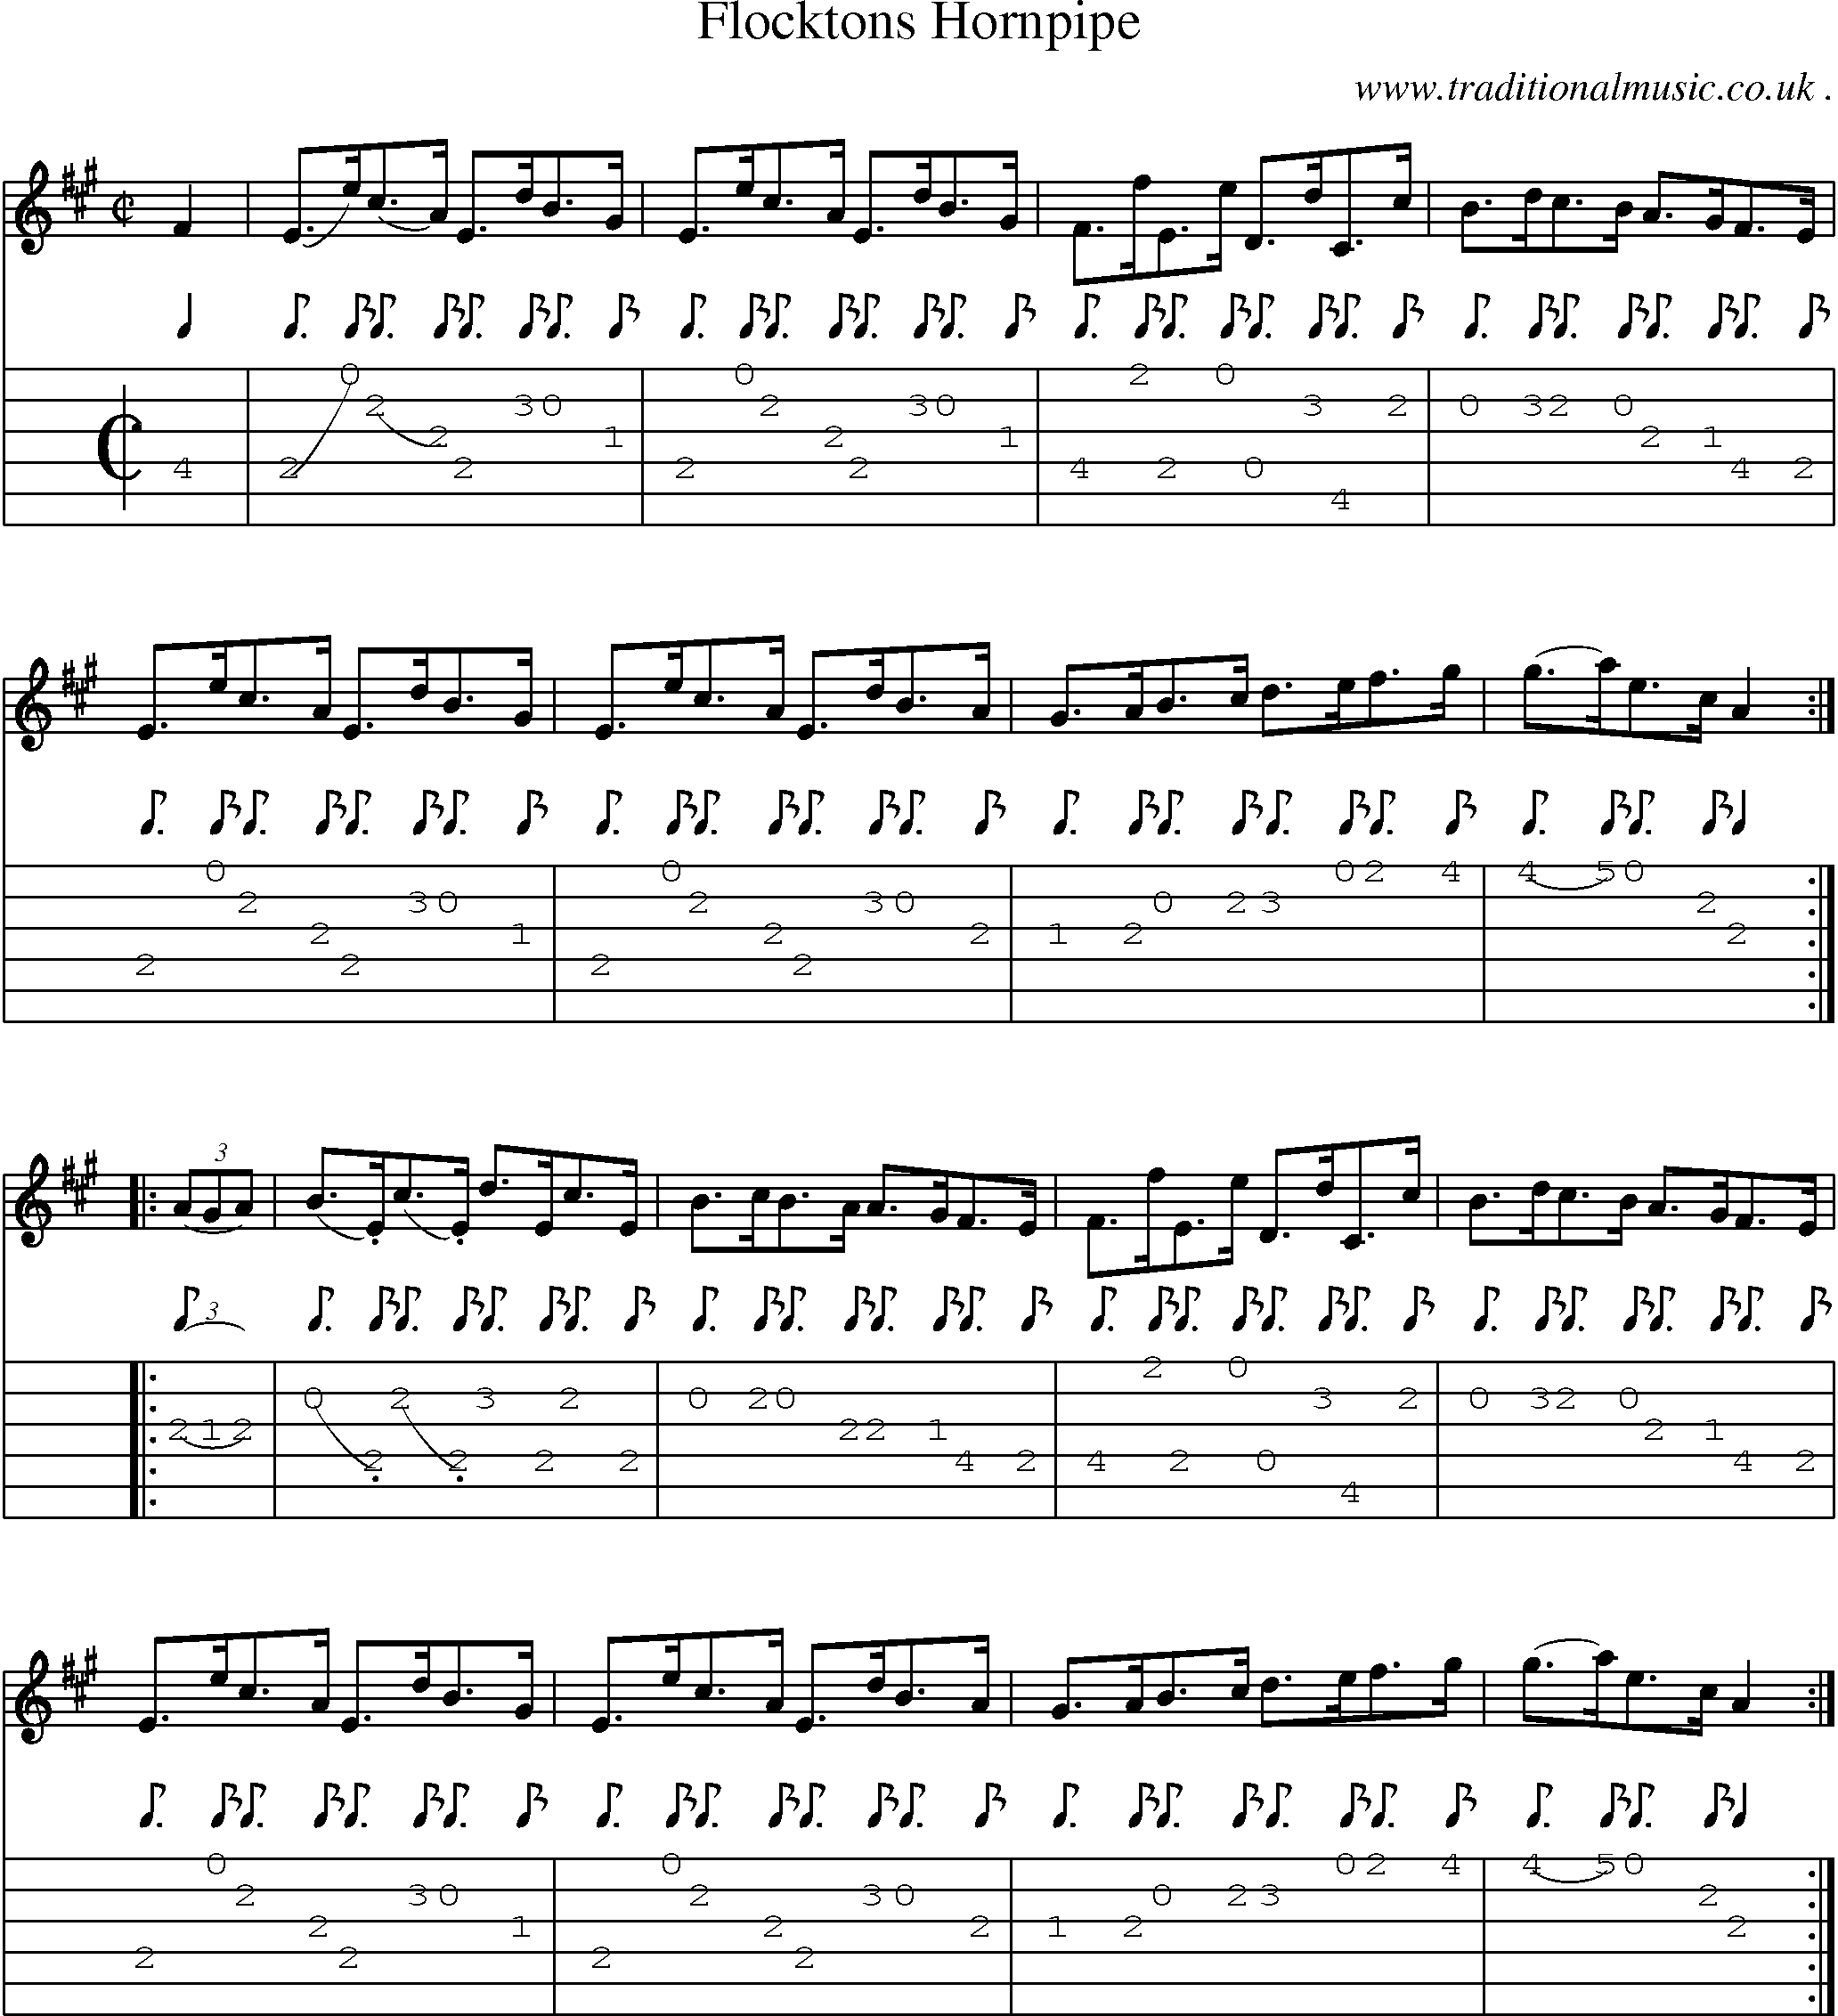 Sheet-Music and Guitar Tabs for Flocktons Hornpipe